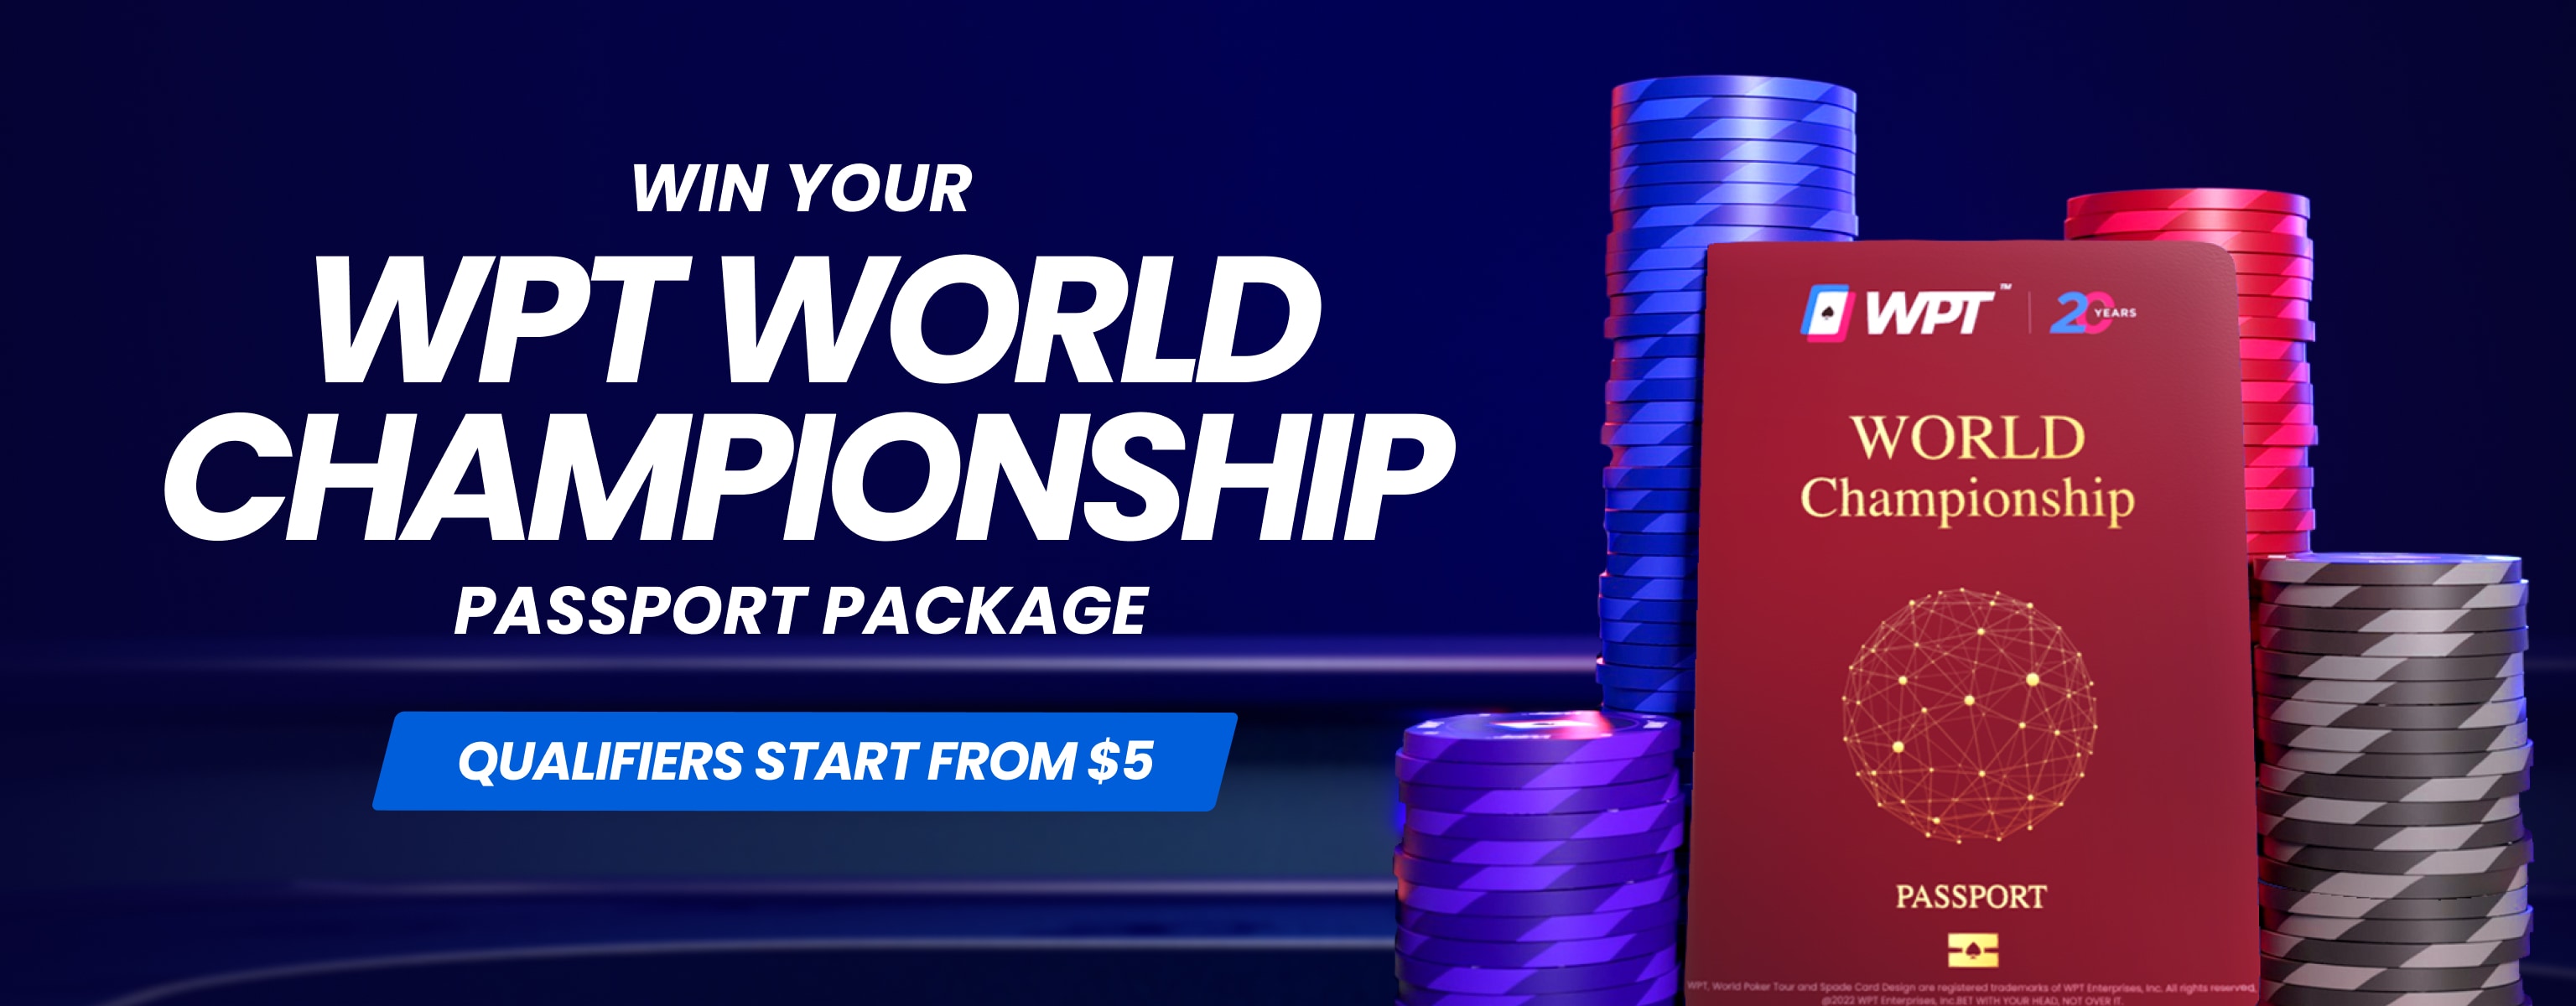 WPT Global WPT World Championship Qualifiers Start at Just $5